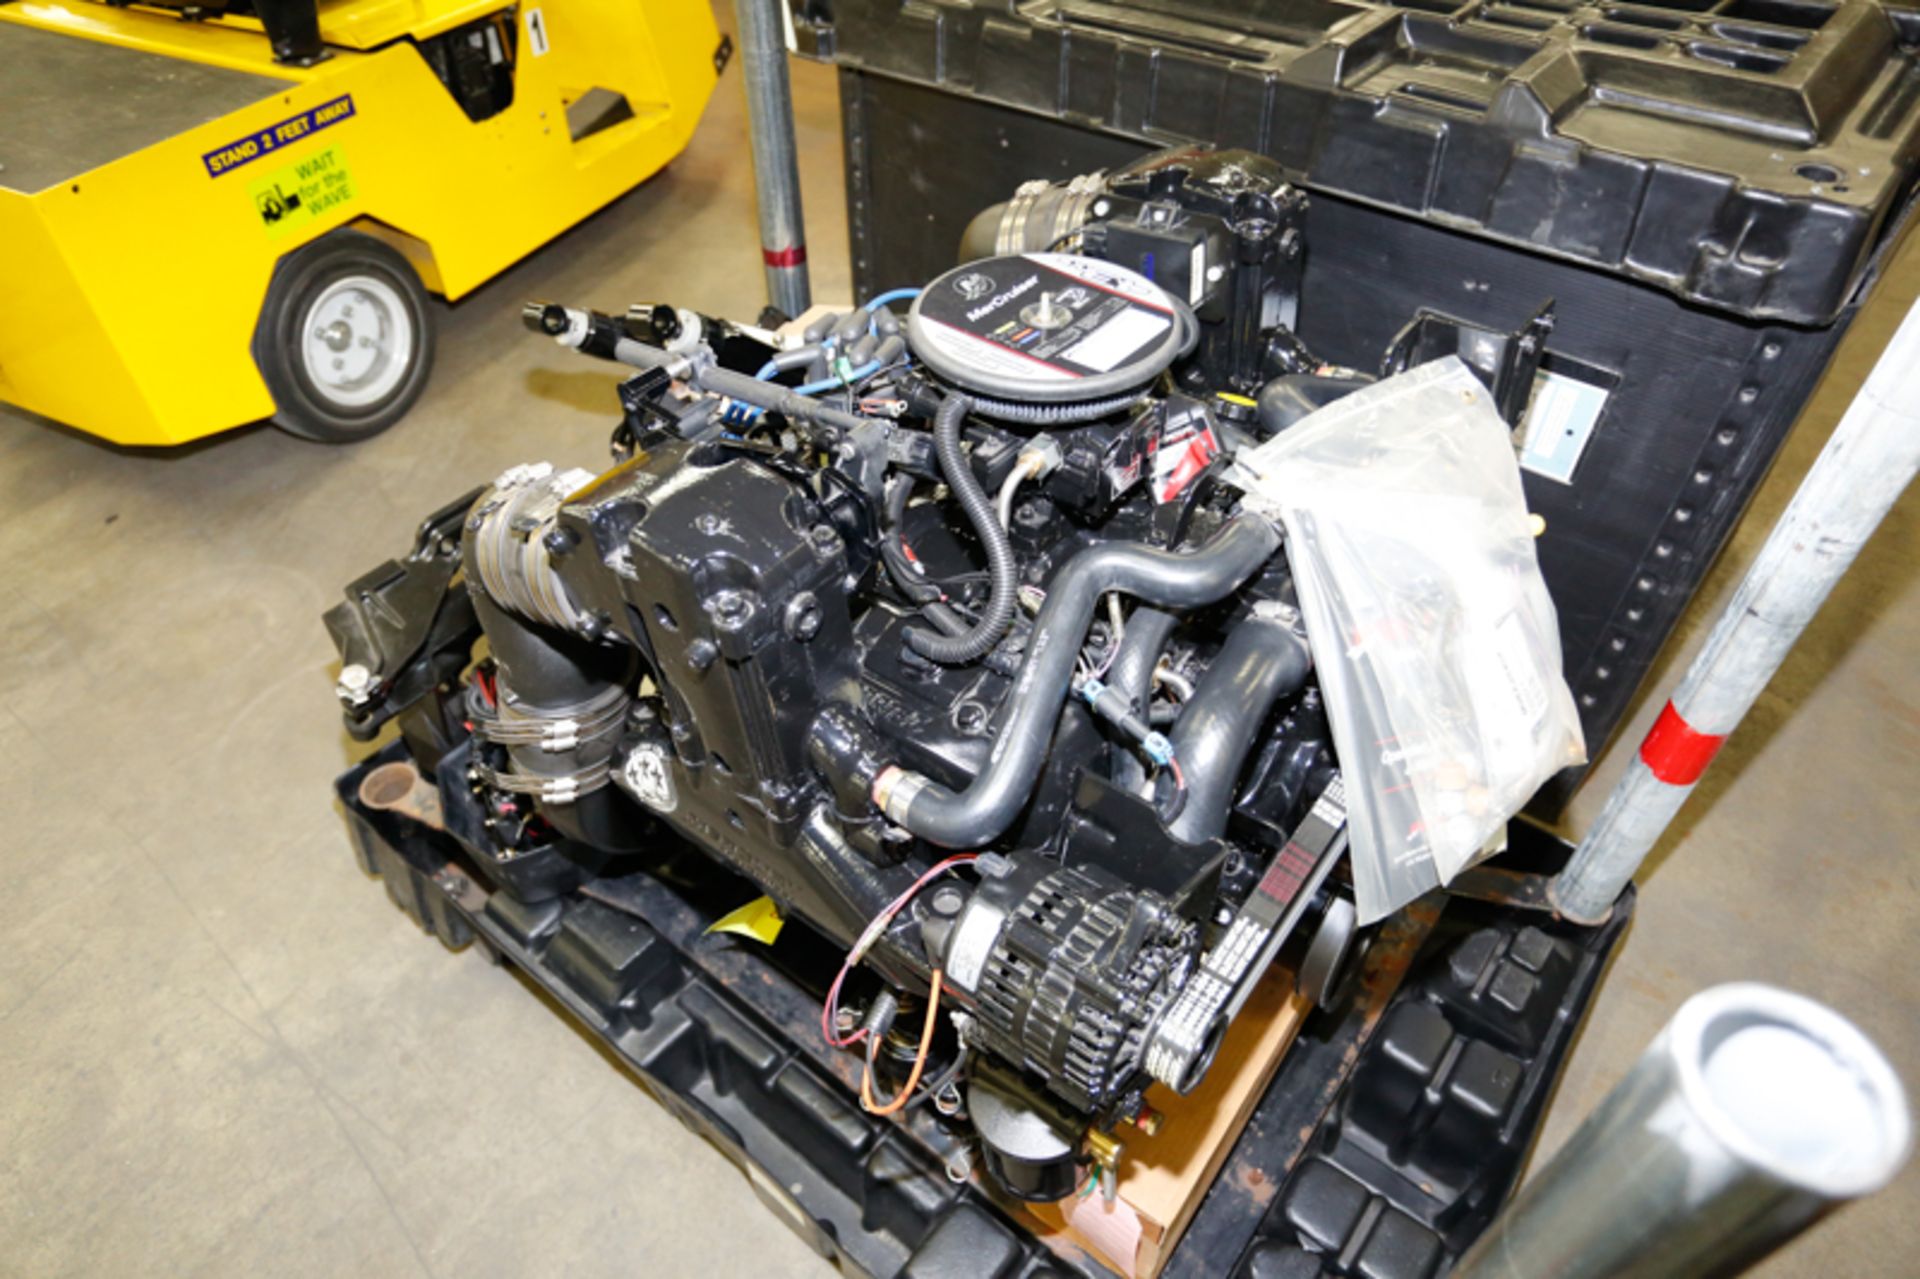 NEW - MERCRUISER INBOARD ENGINE 4.3 TKS, ALPHA 1 TRANSOM (NEW IN CRATE) - Image 2 of 3